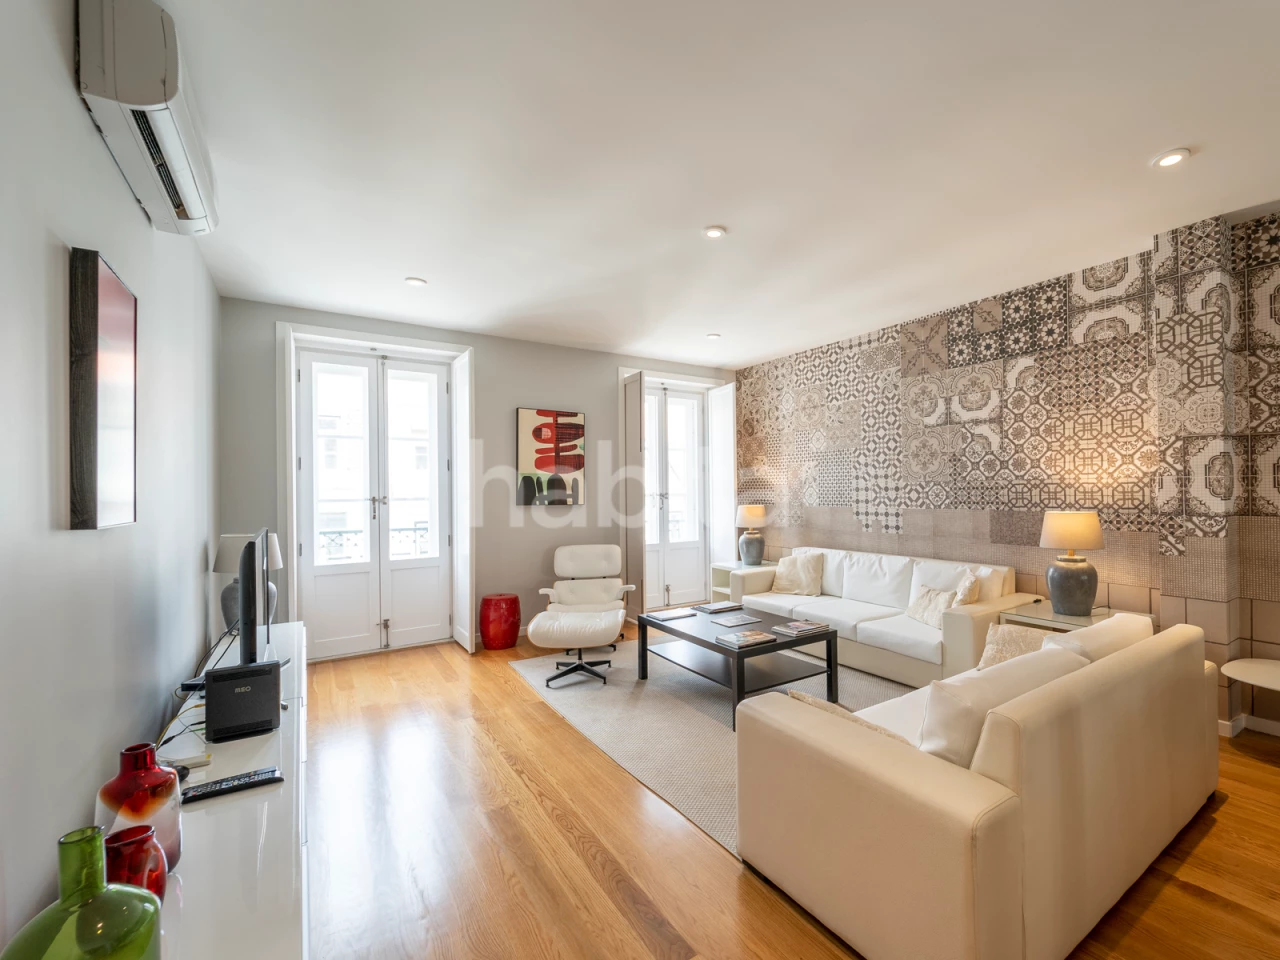 2 BEDROOM FLAT 144M2 FURNISHED AND EQUIPPED WITH BALCONY IN DOWNTOWN LISBON